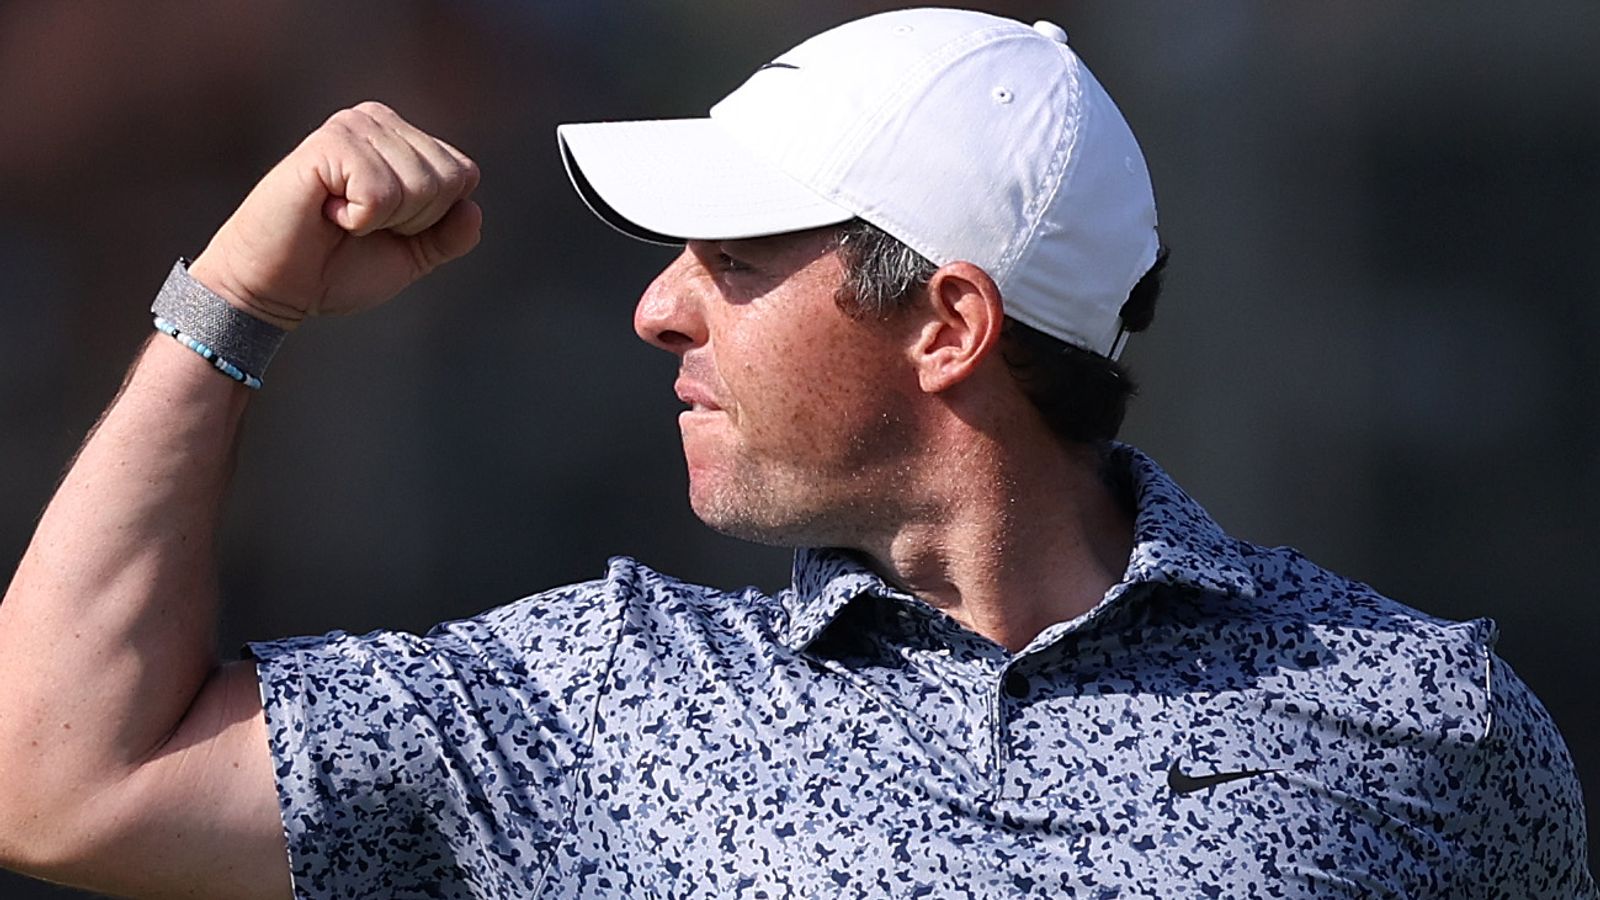 McIlroy: I've never felt more complete as a player | 'I could double career wins'